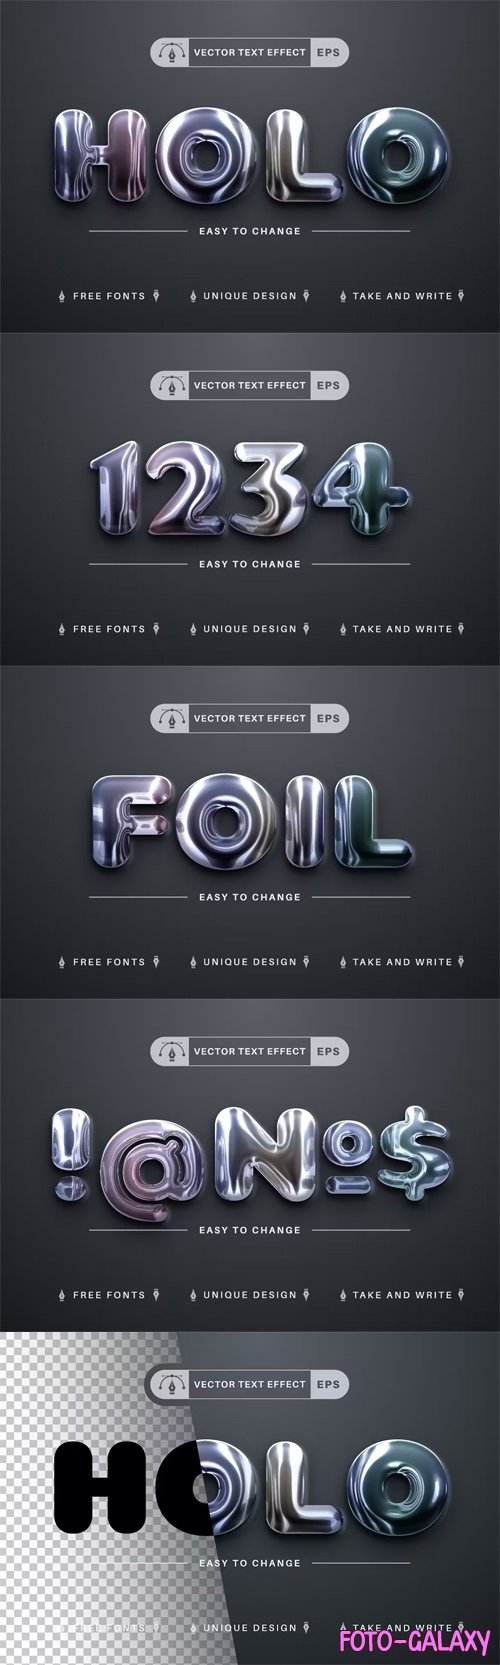 Holo - Editable Text Effect, Font Style